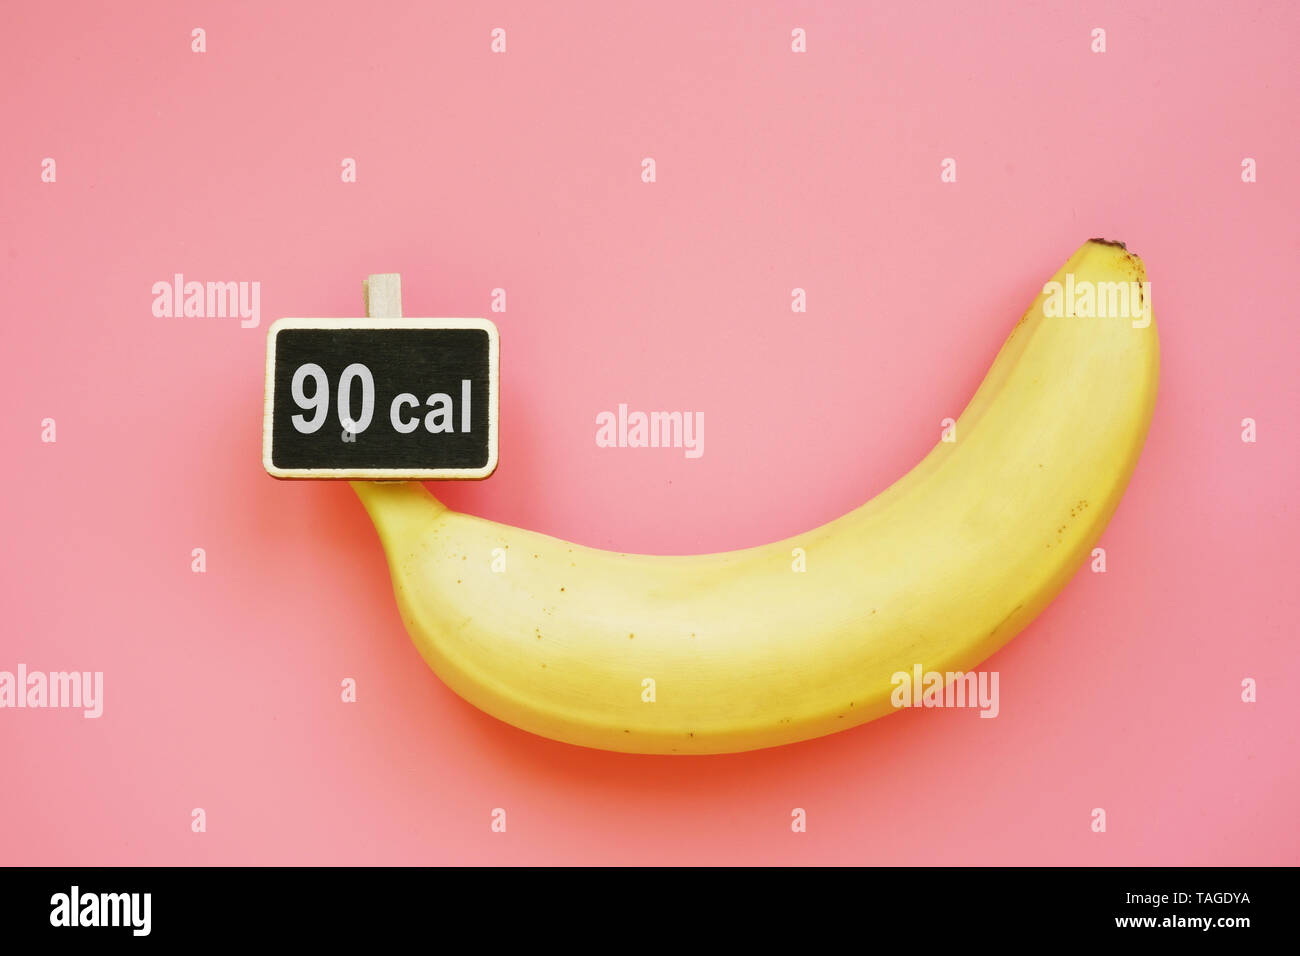 Banana and calorie content for counting of diet plan. Stock Photo